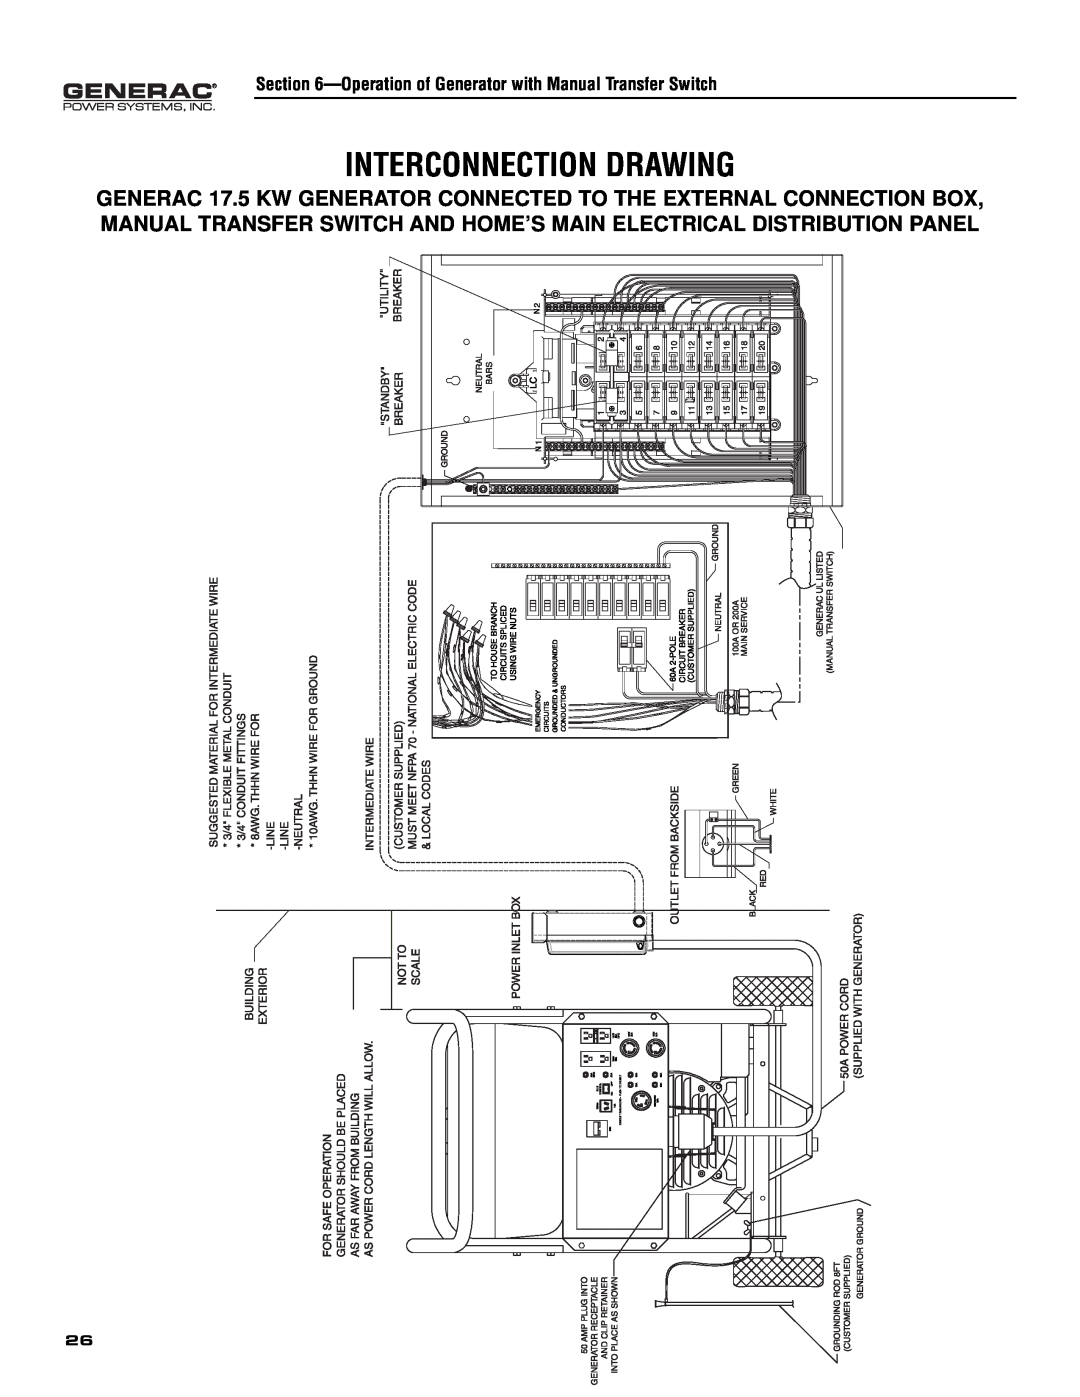 Generac 005308-0 owner manual Interconnection Drawing, Operation of Generator with Manual Transfer Switch 